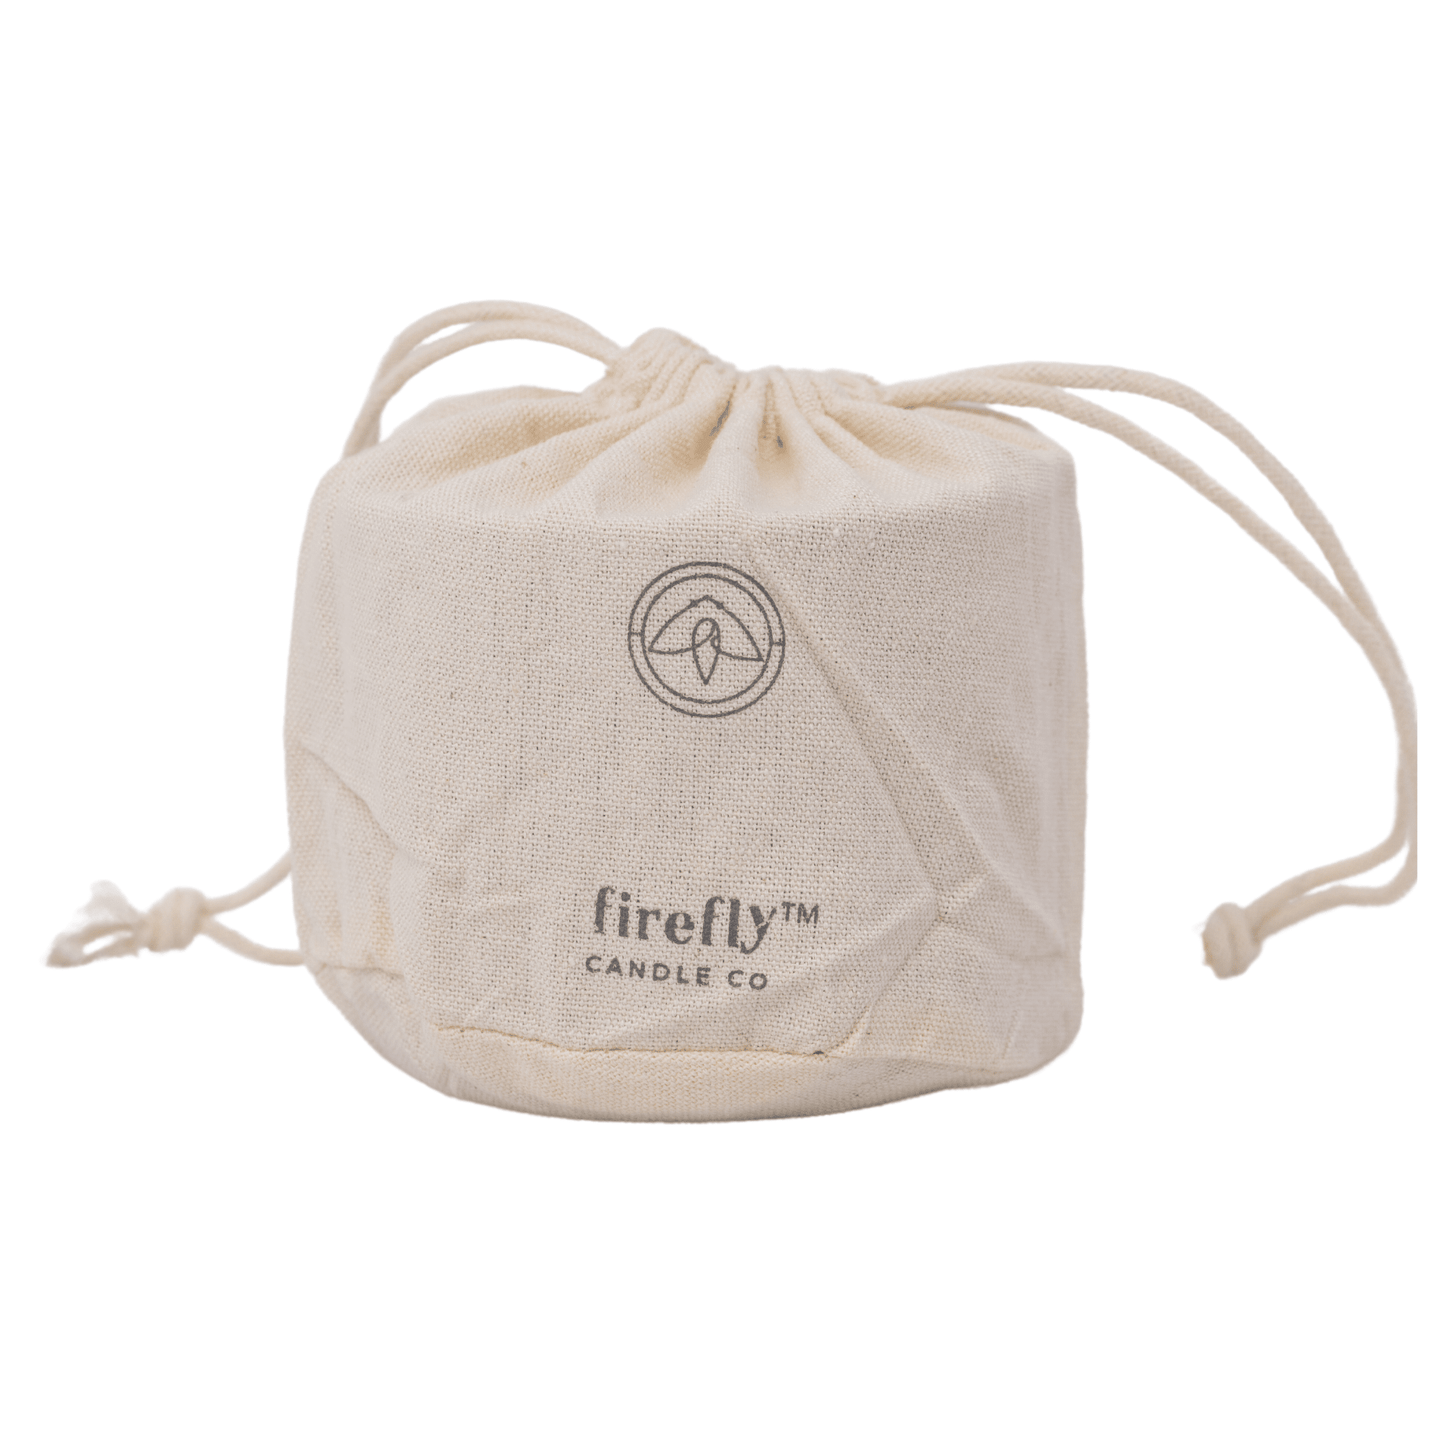 Products Serenity 10oz. Candle - Firefly by Paddywax - Summer Oasis in a Firefly Candle Co branded draw string linen bag